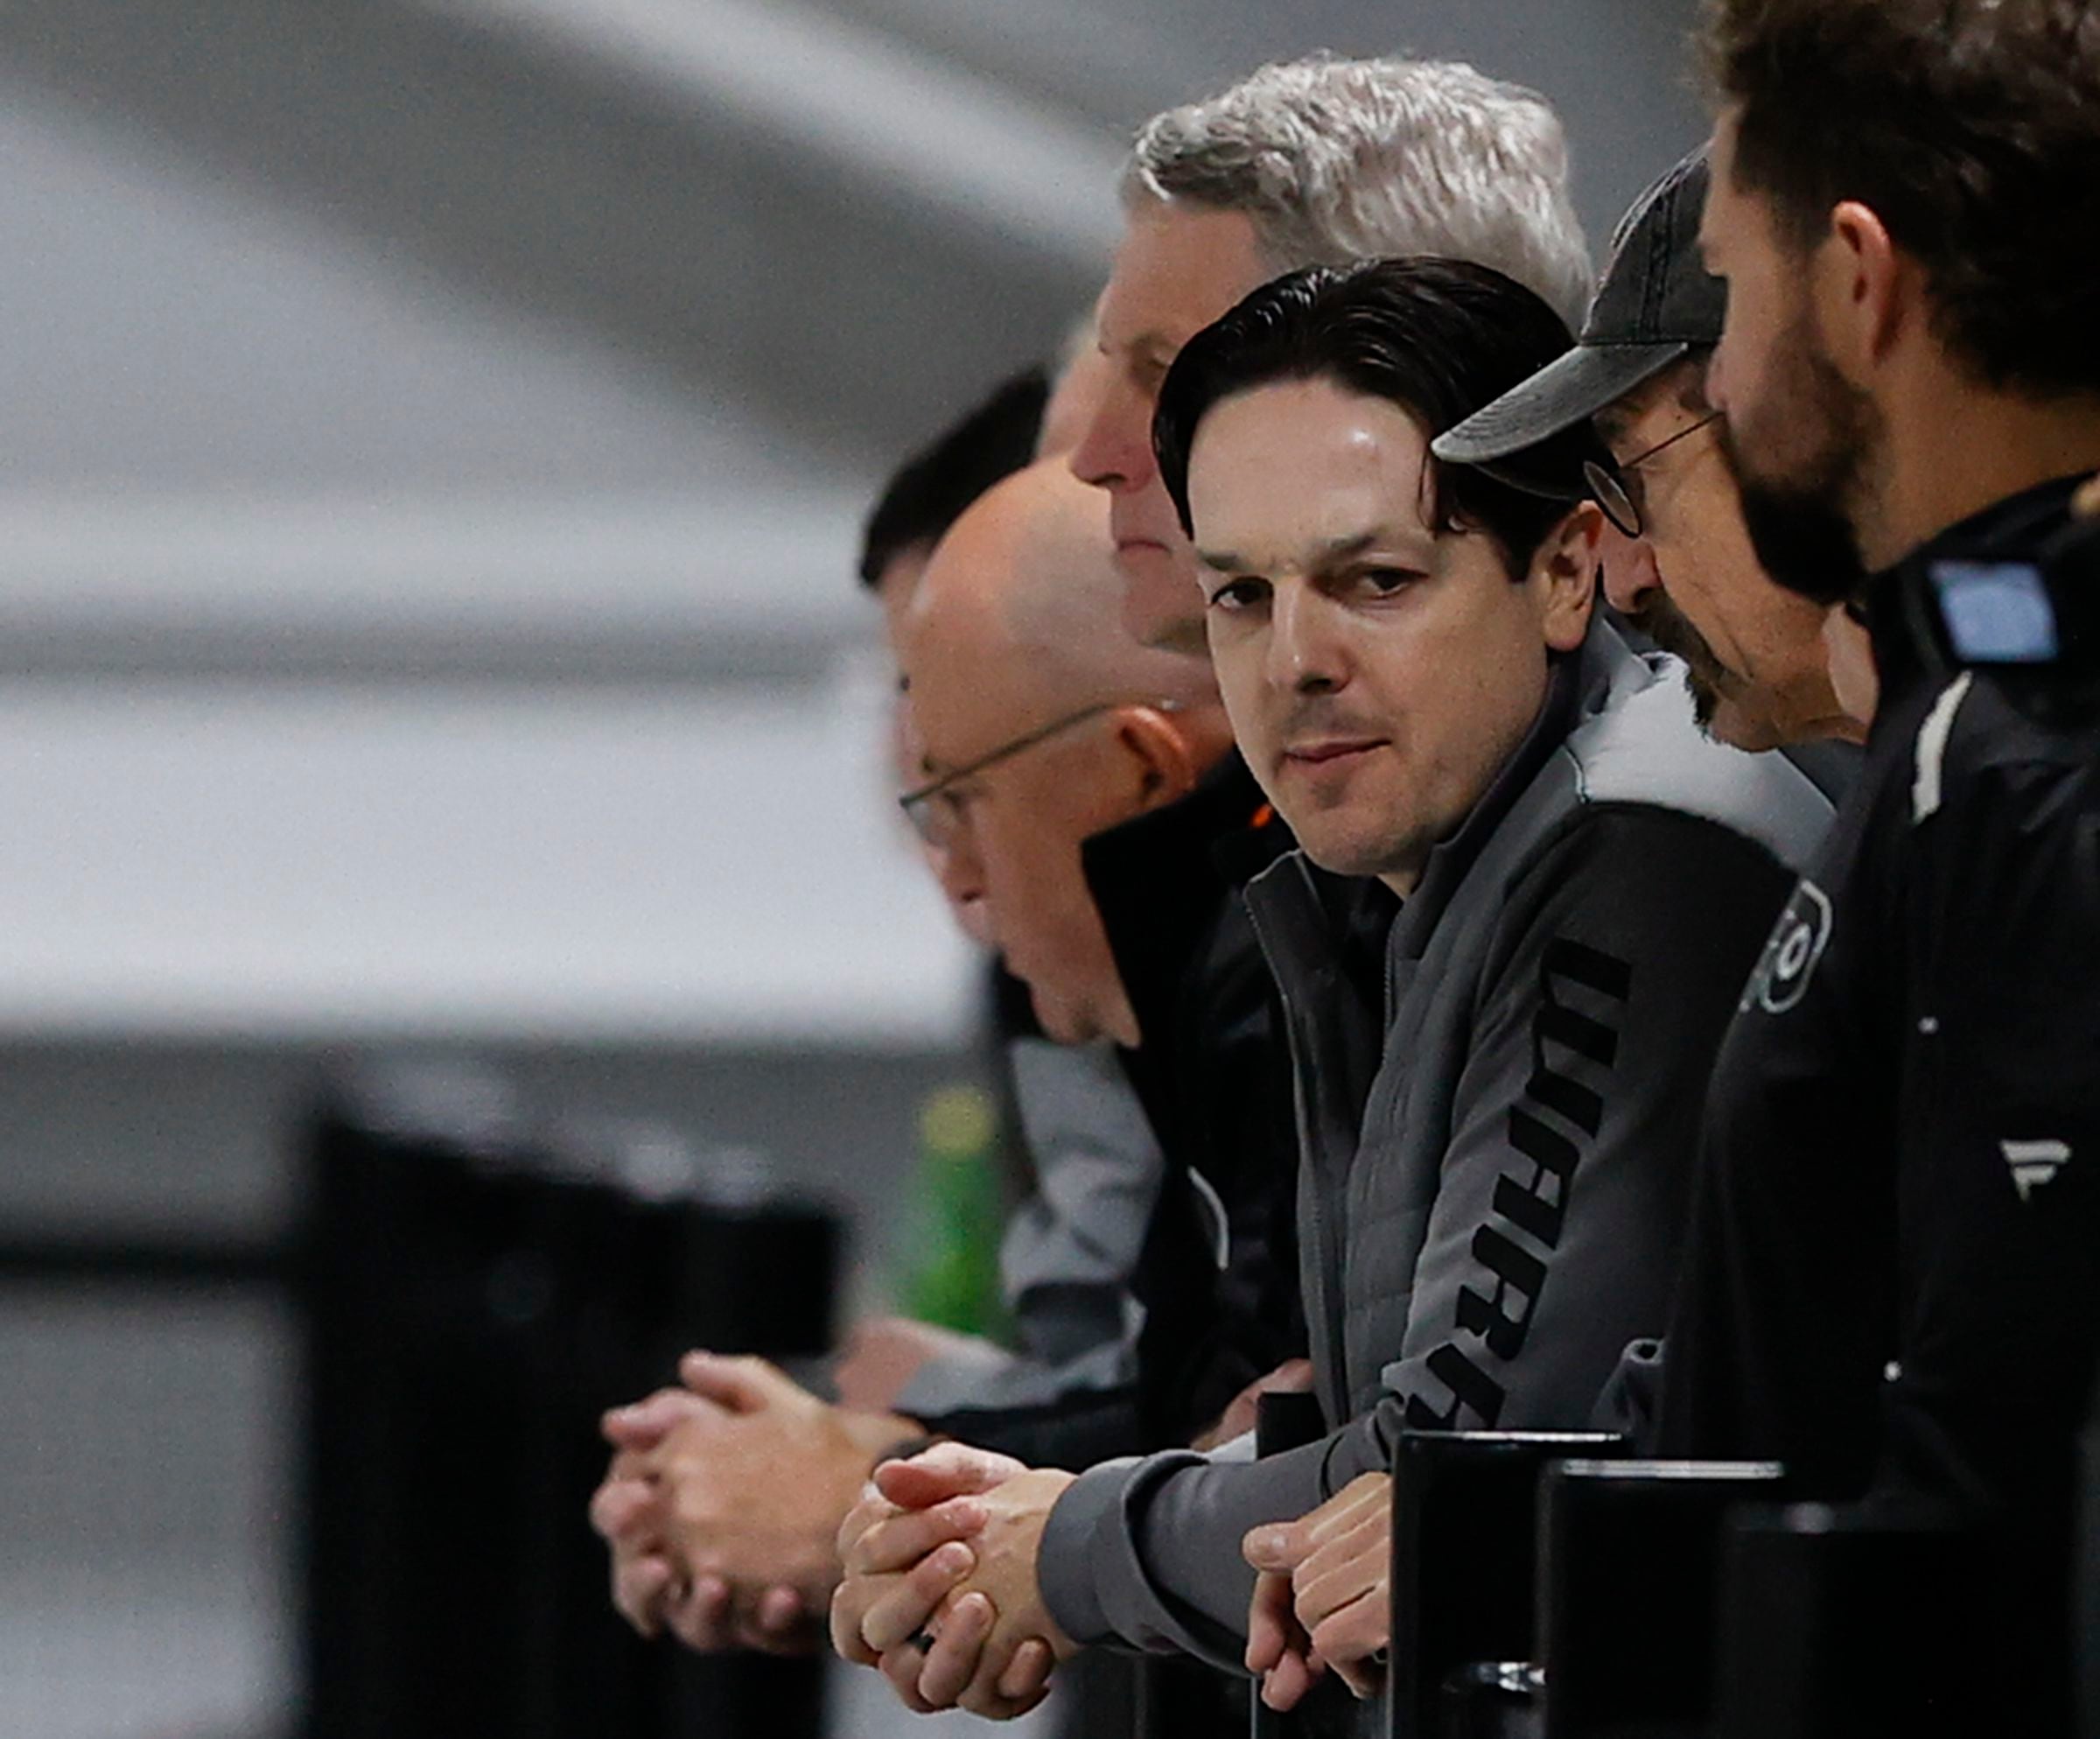 Danny Briere making case for Flyers GM, says 'rebuild doesn't mean fire  sale' – NBC Sports Philadelphia